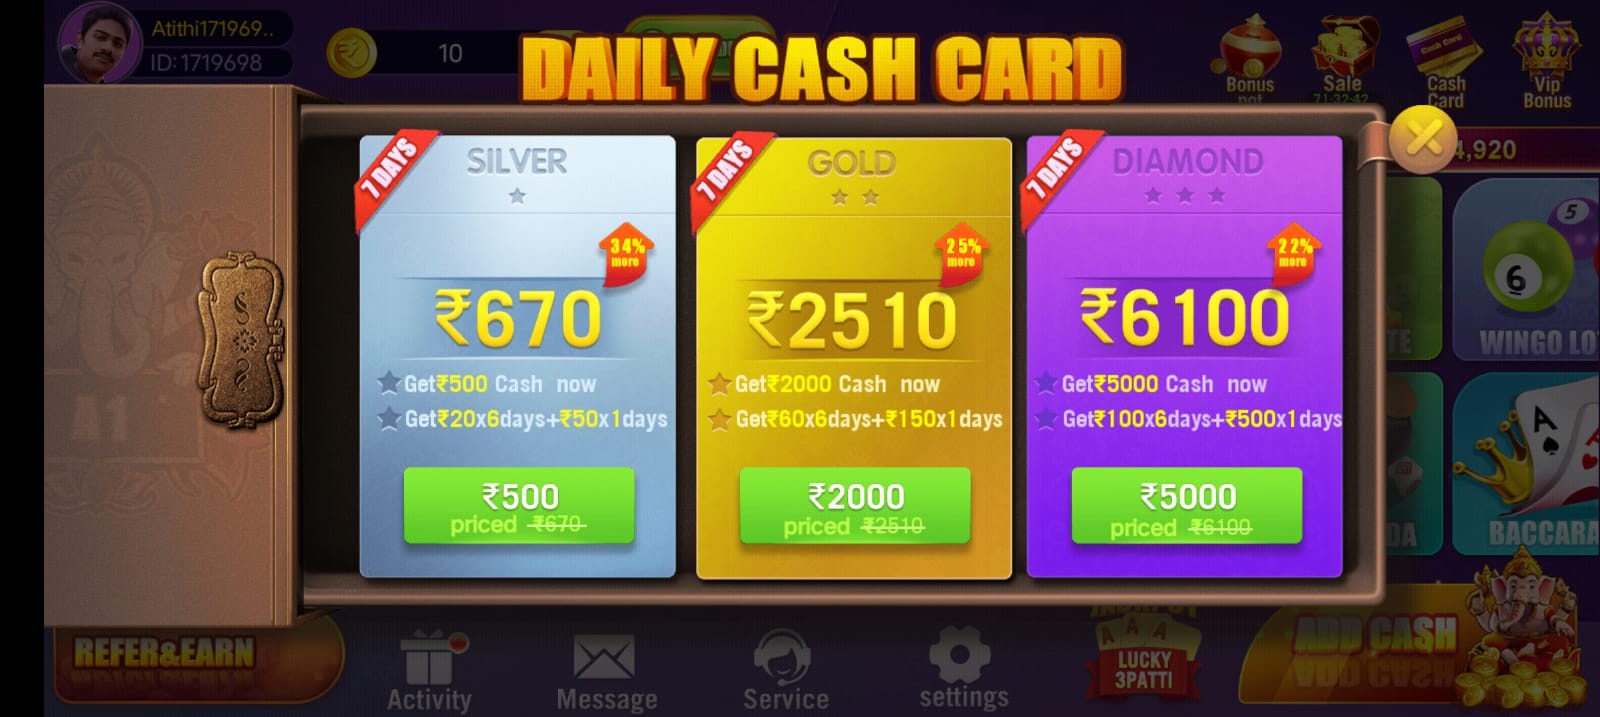 Daily Cash Card In Rummy A1 Application